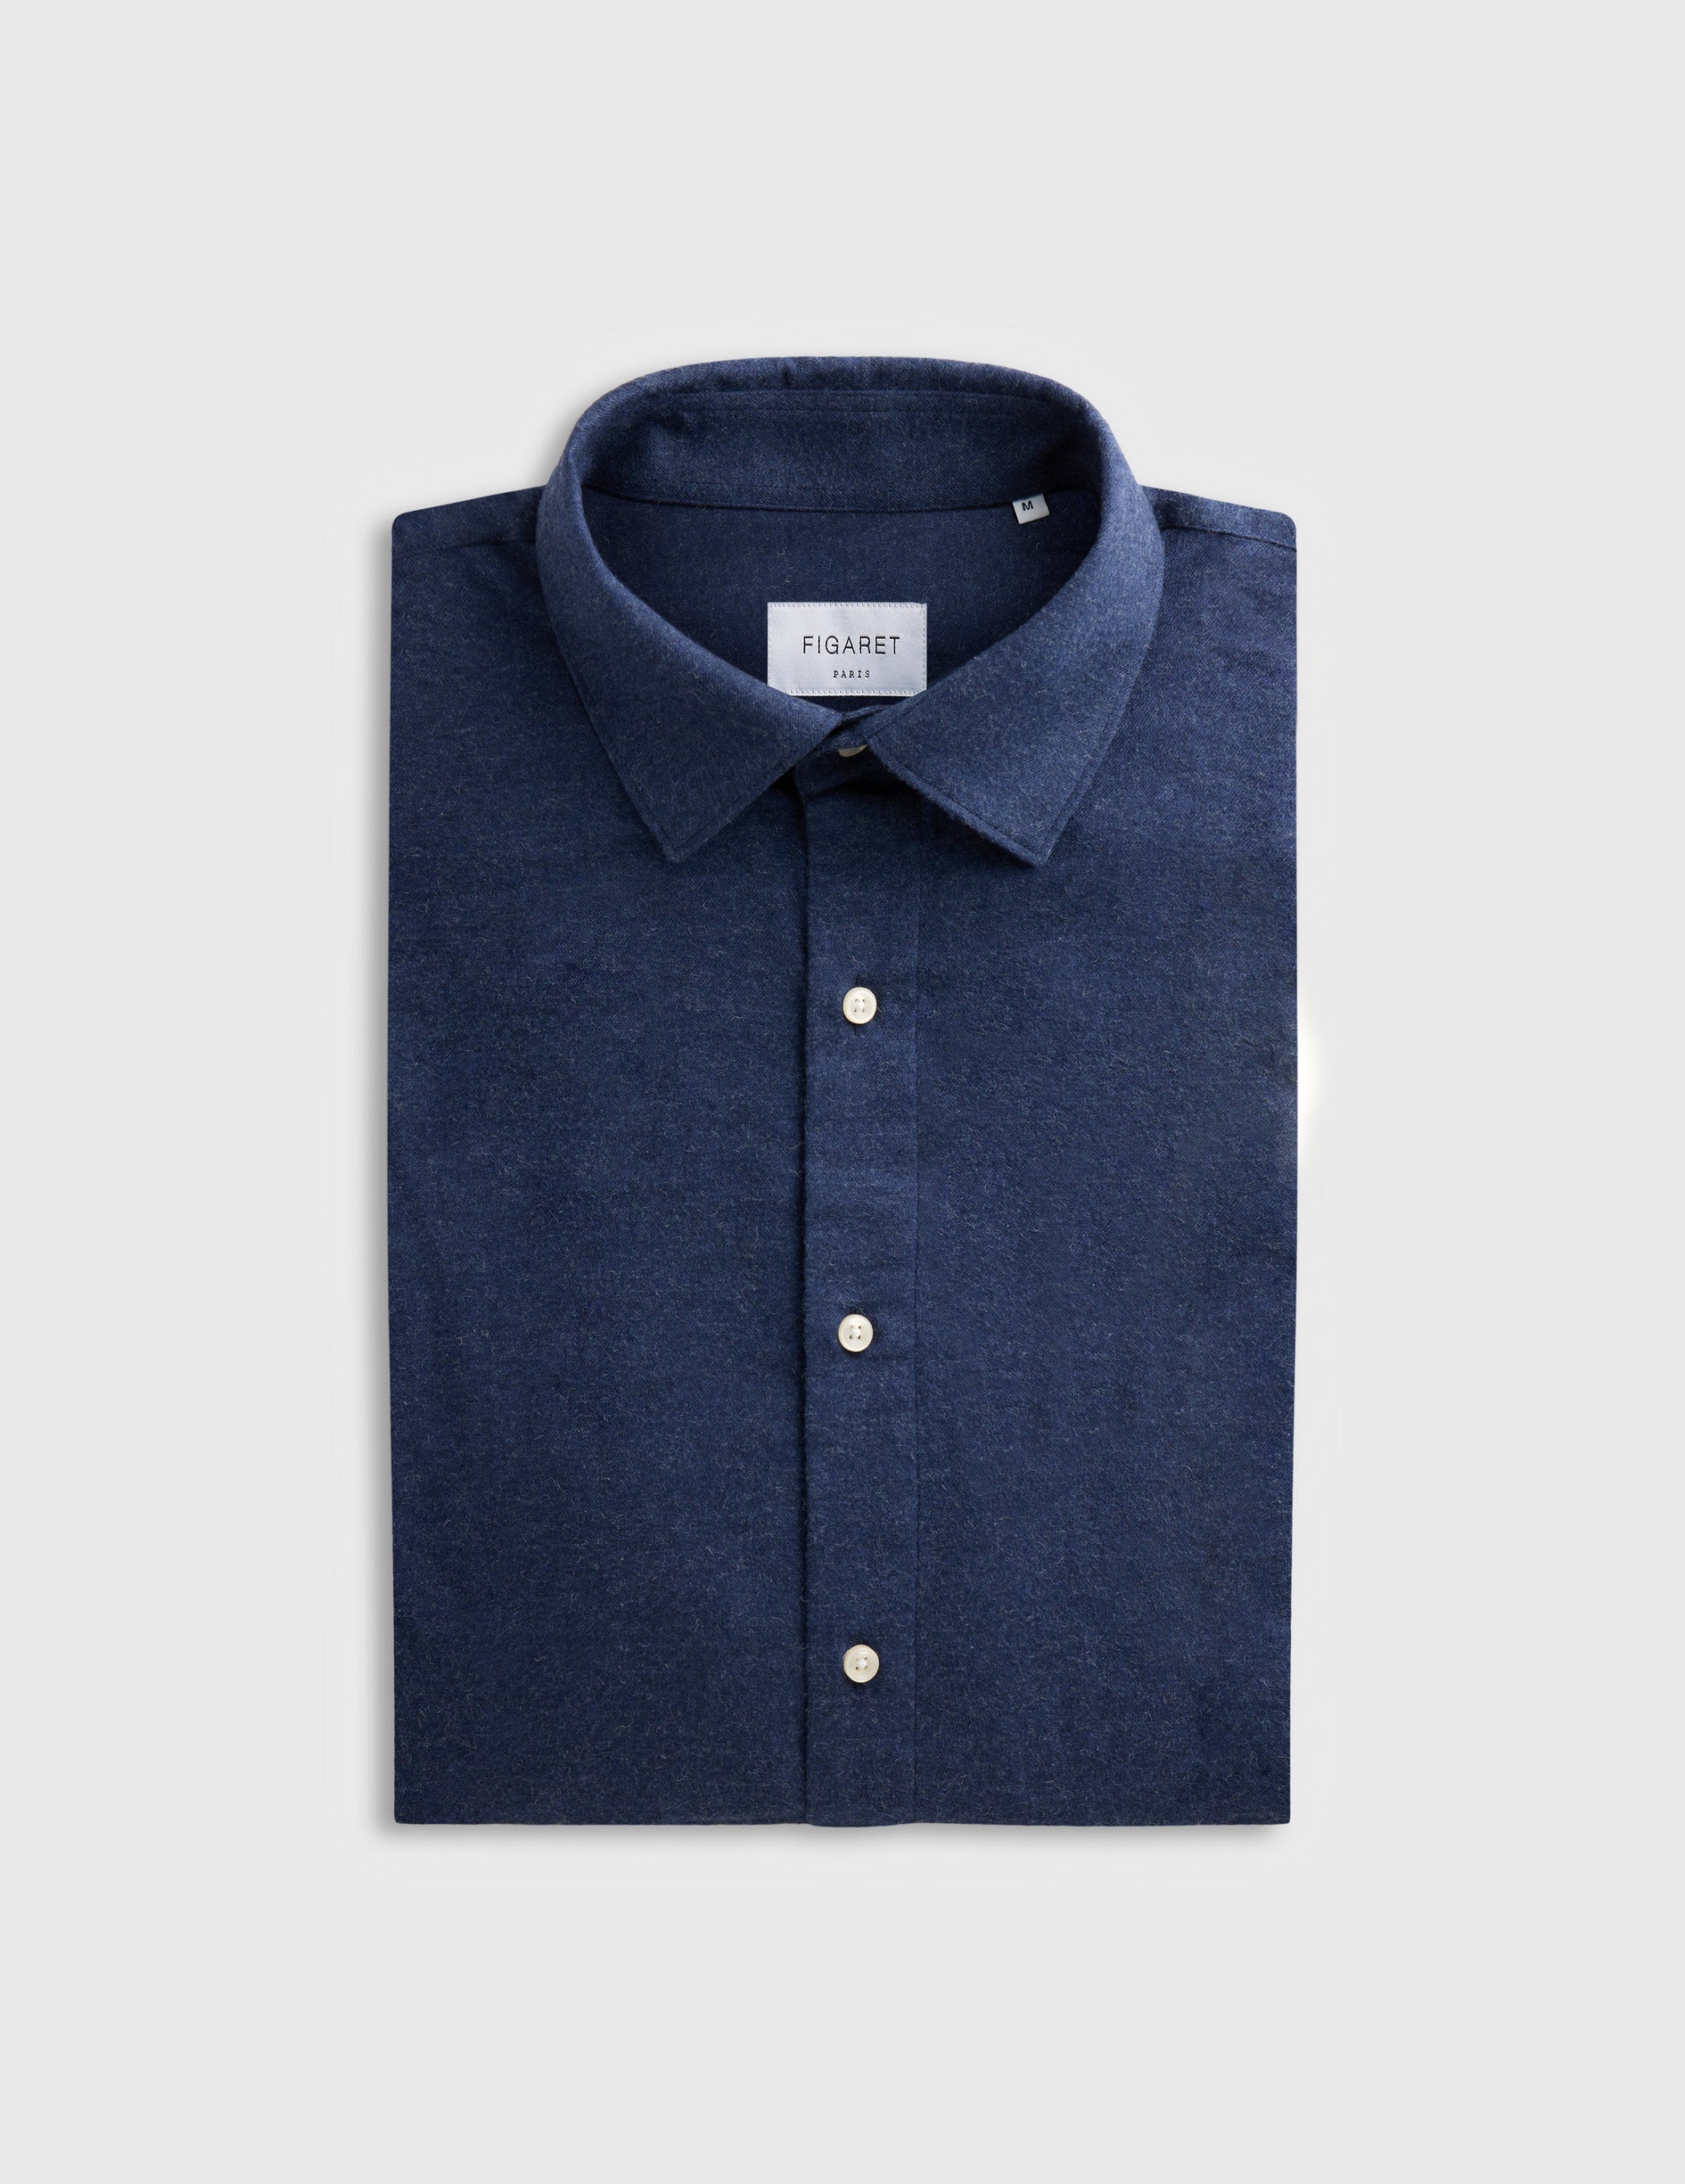 Navy cotton cashmere Auguste shirt - Flannel - French Collar